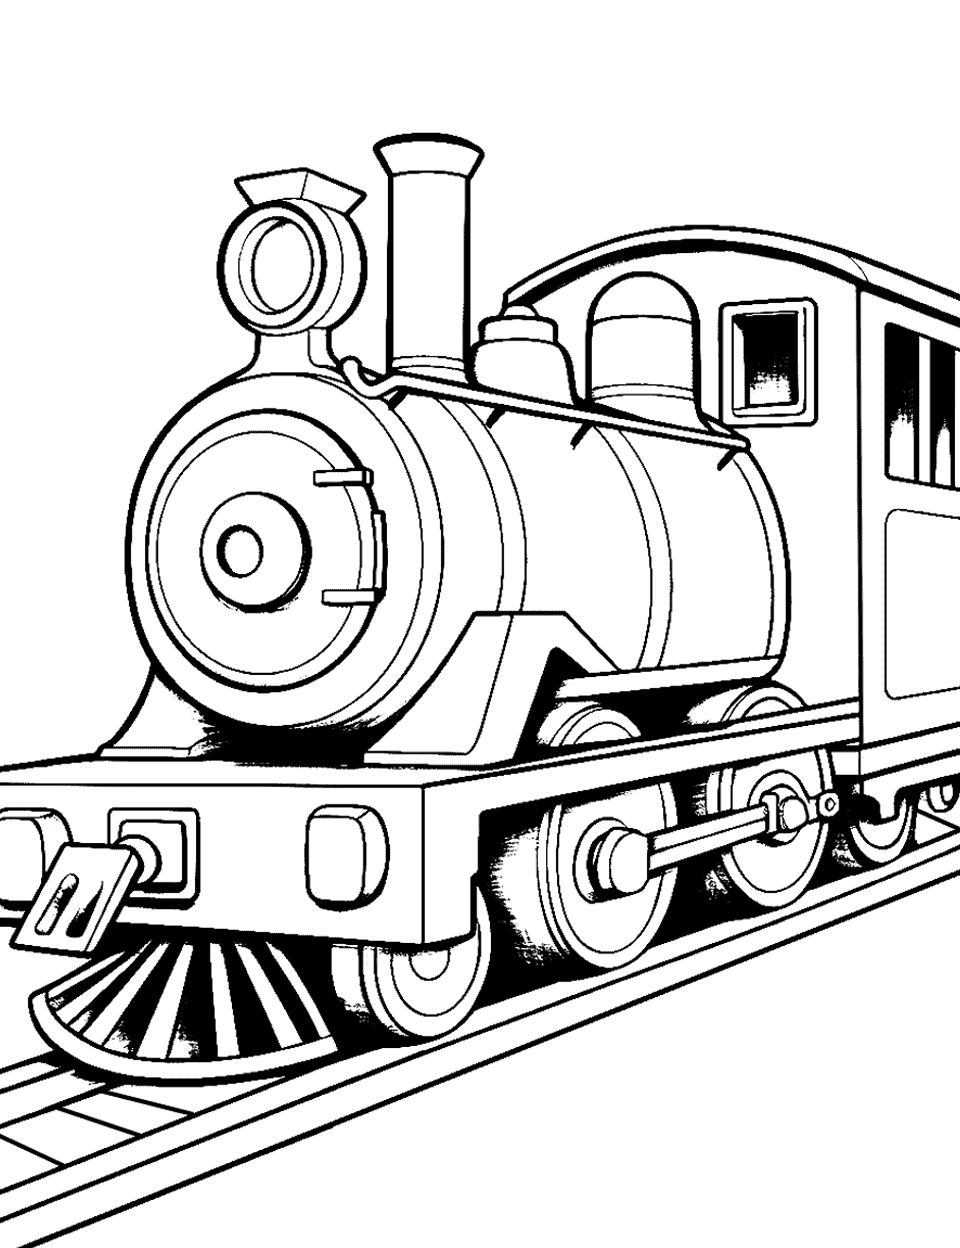 Toy Train Coloring Page - A close-up of a classic toy train going forward.